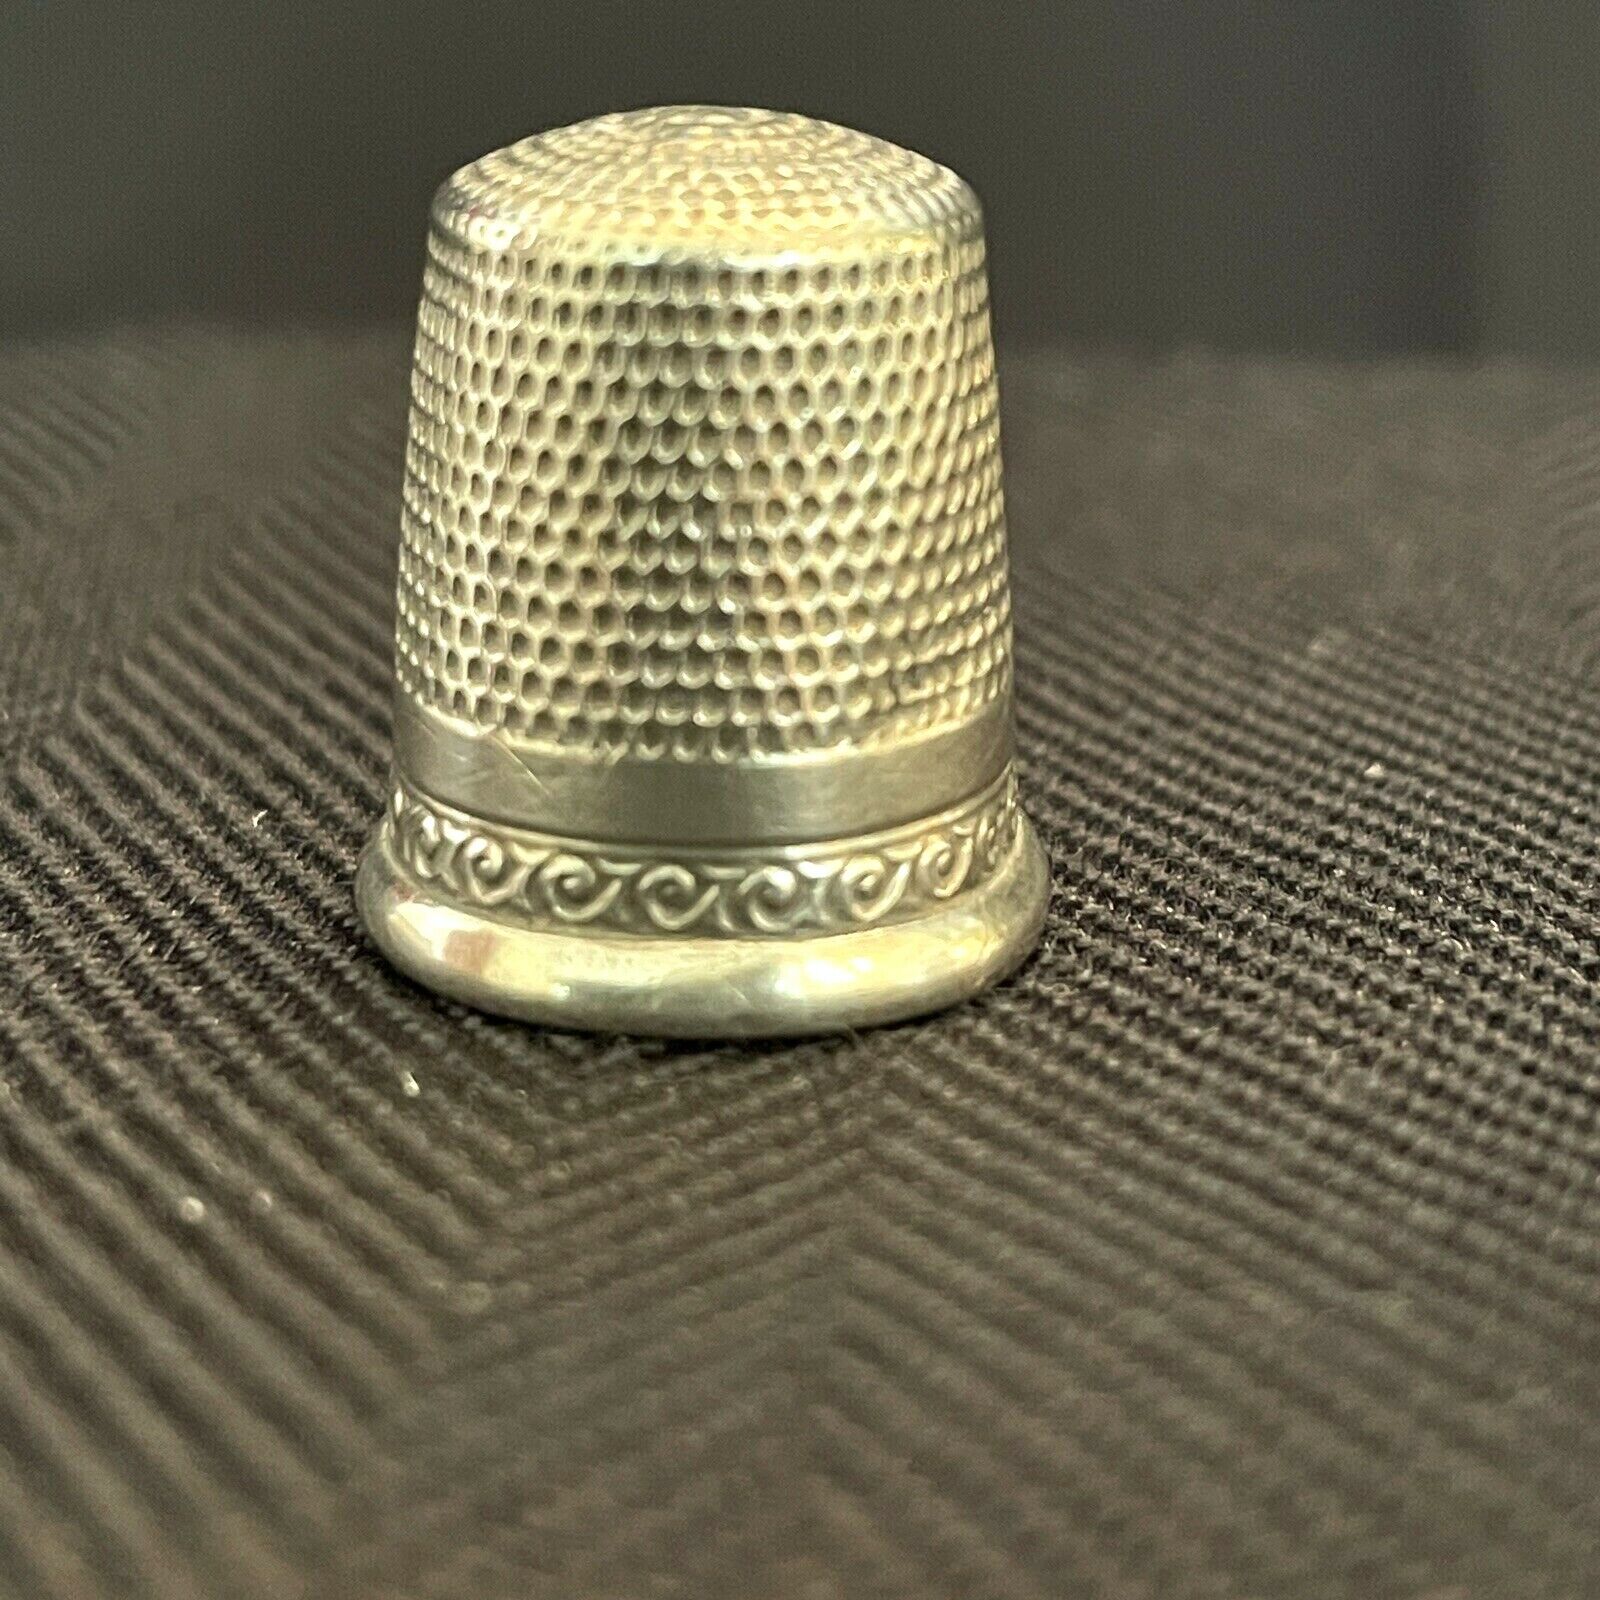  VINTAGE WAITE THRESHER STERLING SILVER THIMBLE 